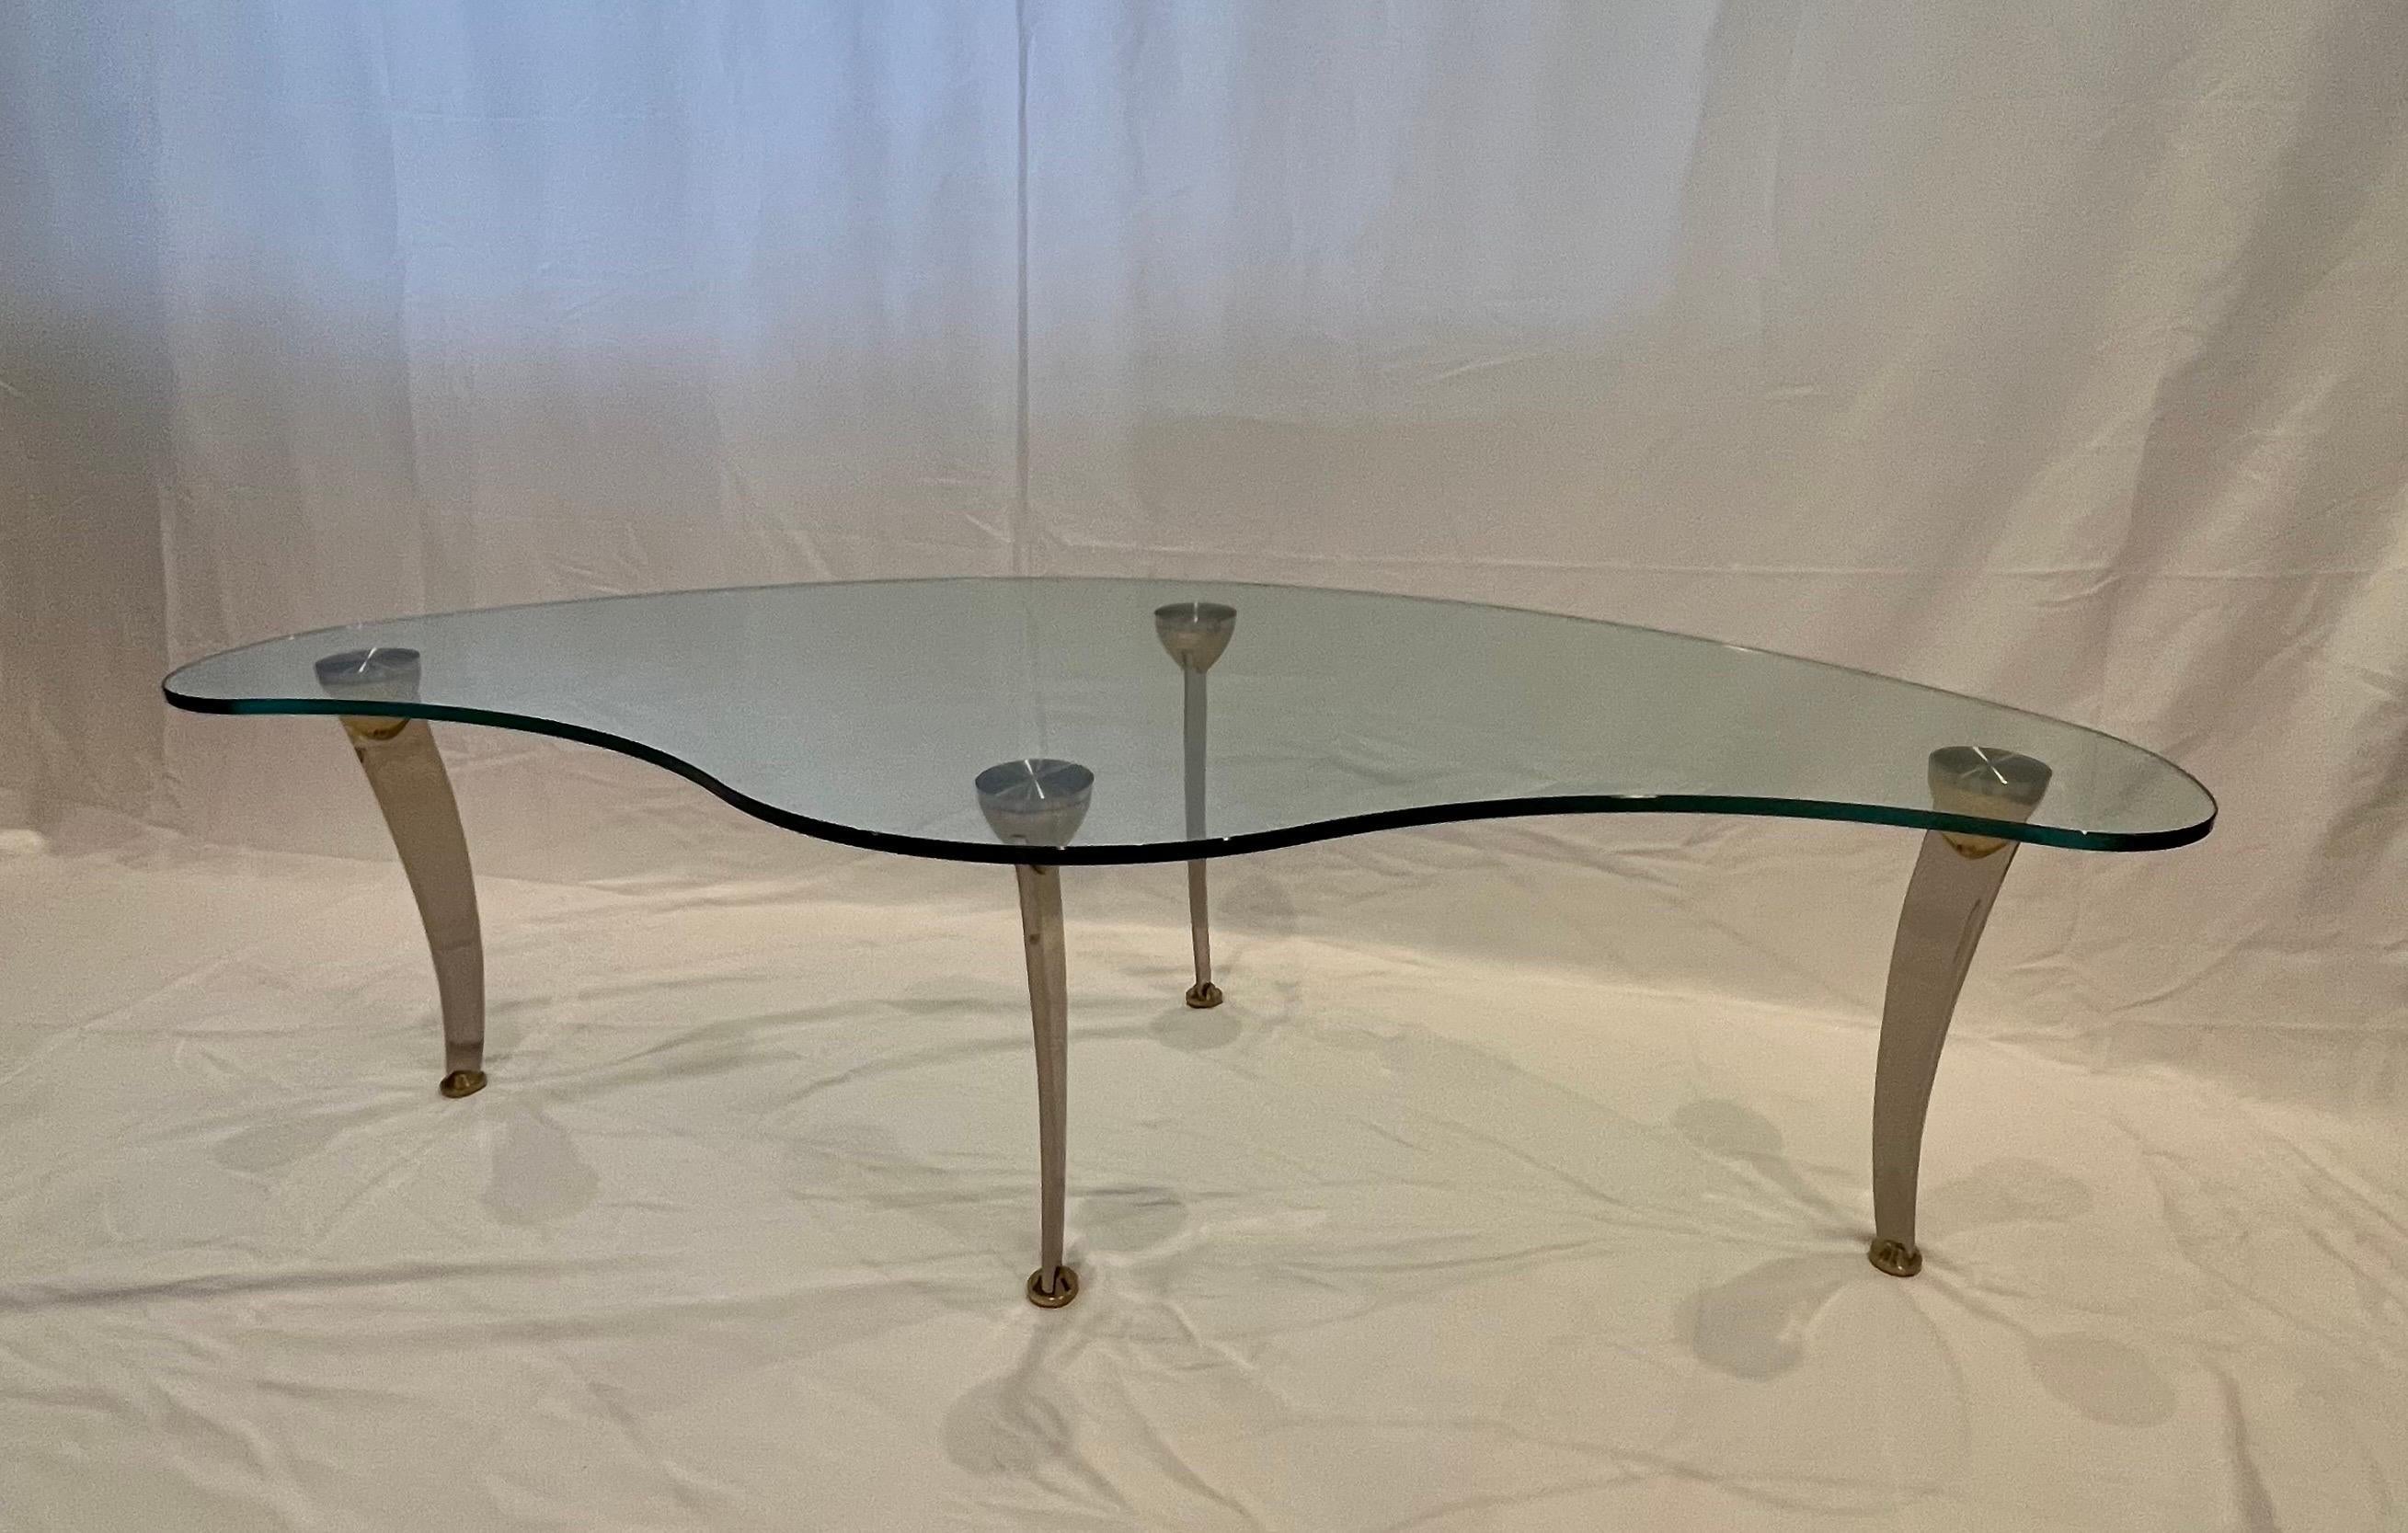 Modern Biomorphic Glass Coffee Table Chrome and Brass Sculptural Legs In Good Condition For Sale In W Allenhurst, NJ